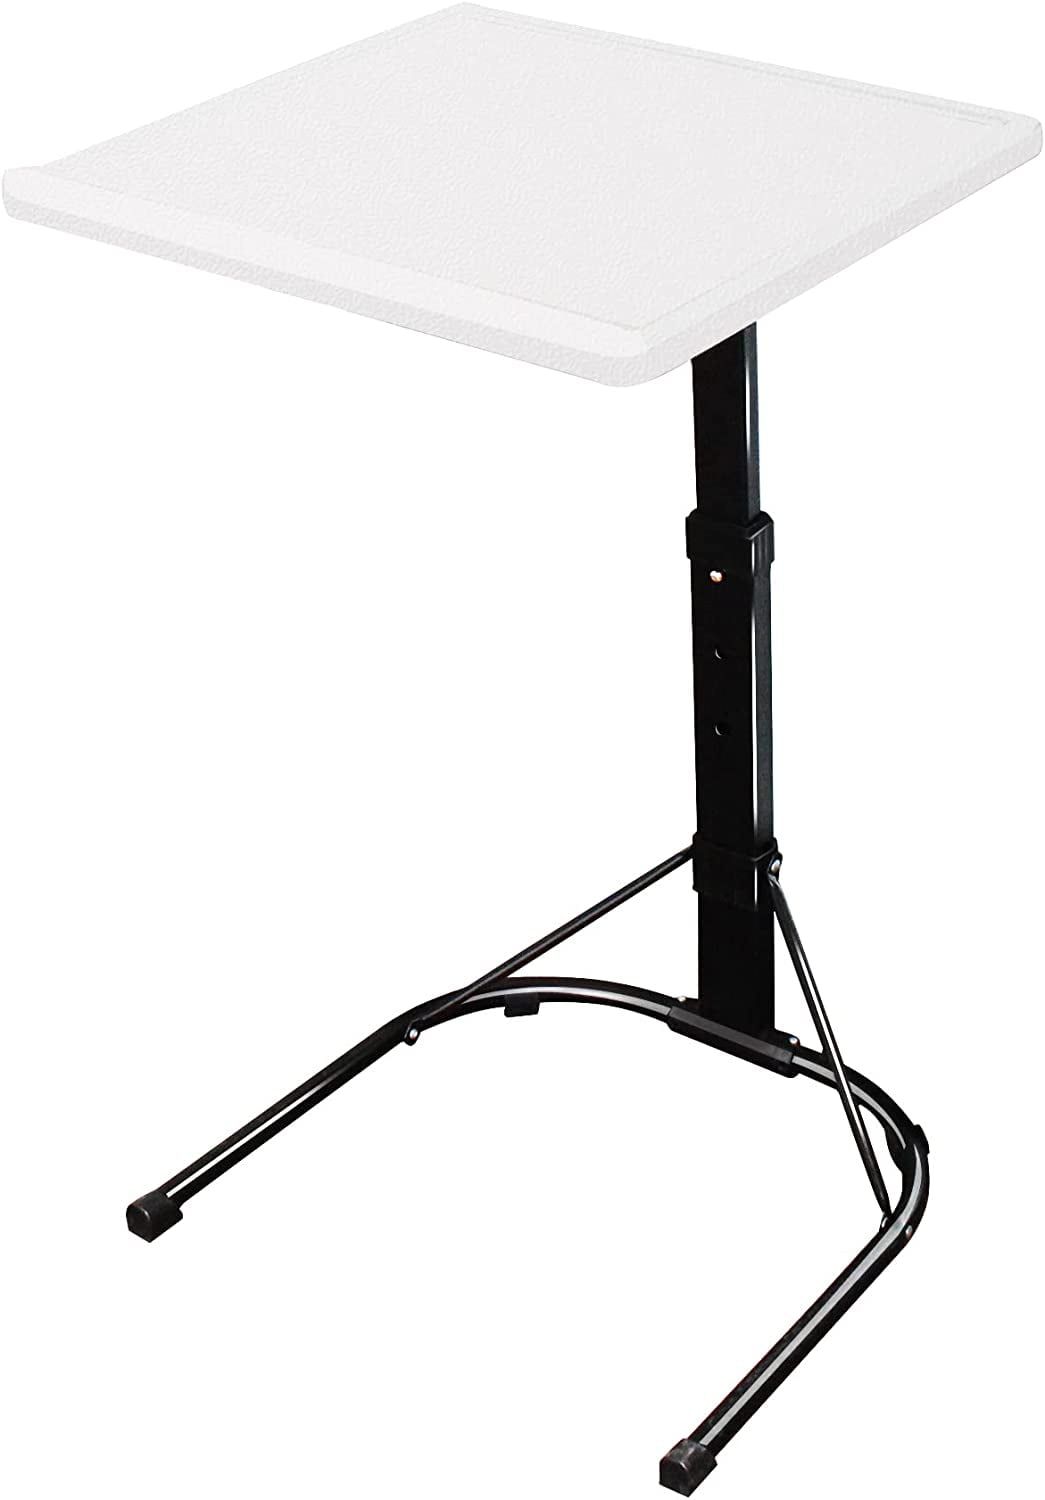 Coveronics Upgrade Folding Tv Tray Table – Adjustable Tv Dinner Table,  Couch Table Trays For Eating, Office, Laptop Stand, Portable Bed Sofa  Dinner Tray With 3 Angles & 3 Height, White – Walmart With Regard To Foldable Portable Adjustable Tv Stands (View 9 of 15)